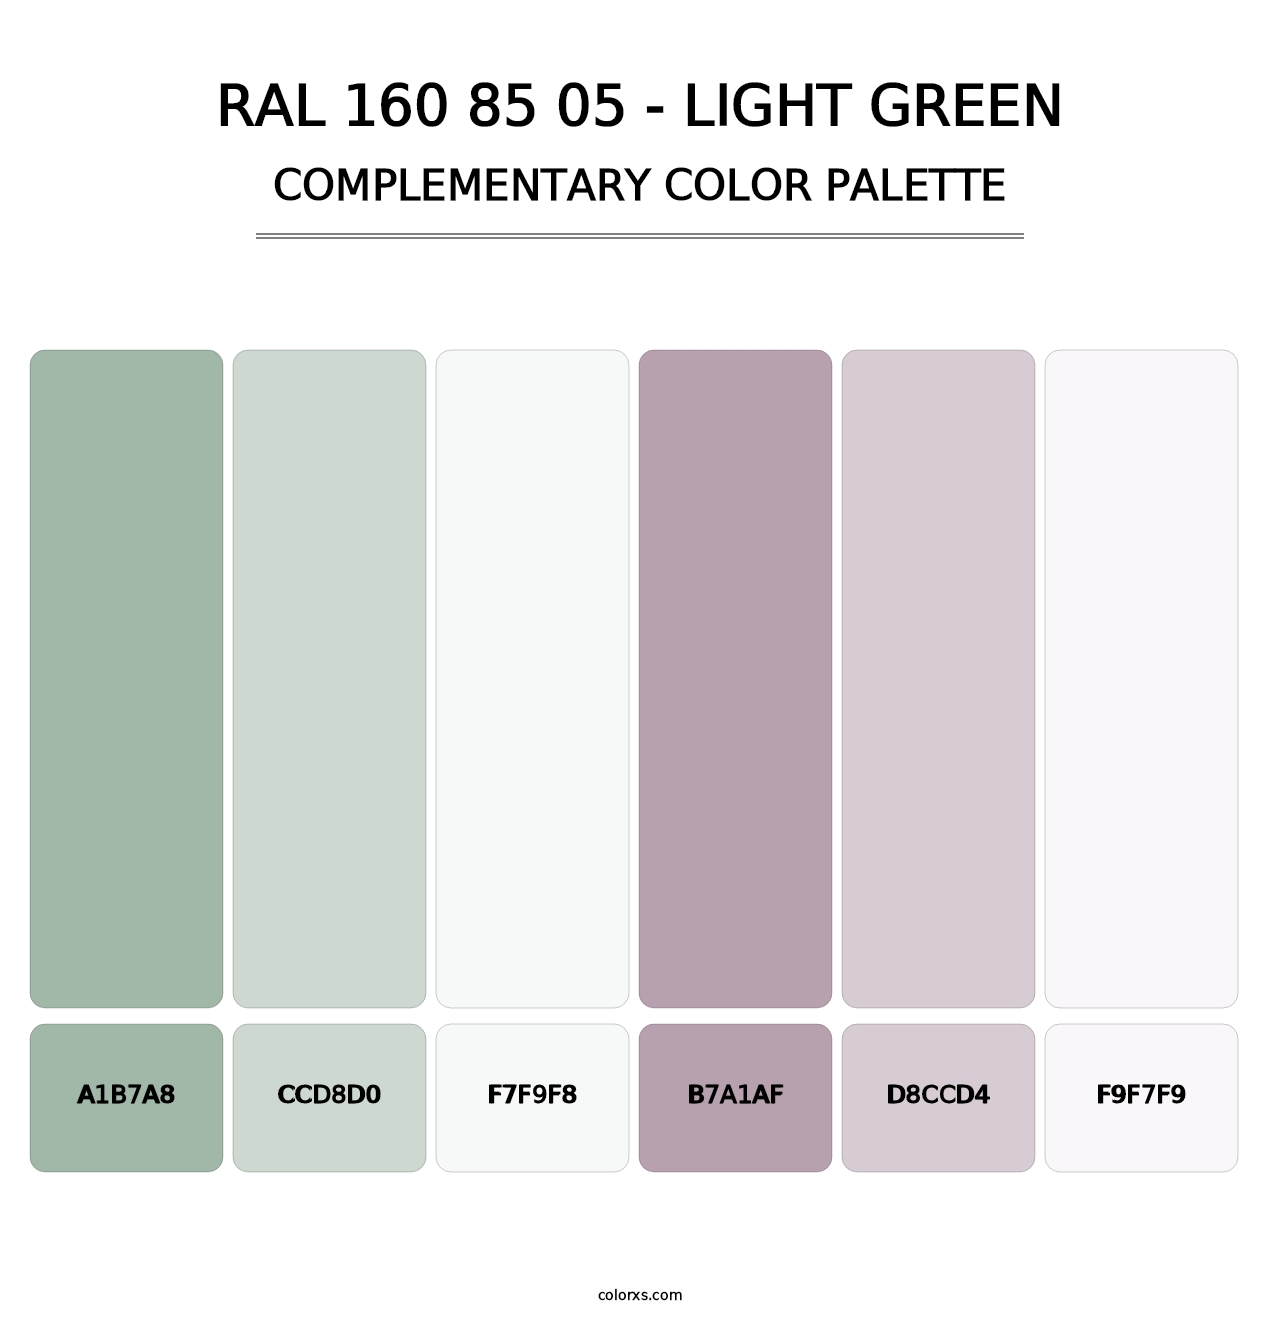 RAL 160 85 05 - Light Green - Complementary Color Palette